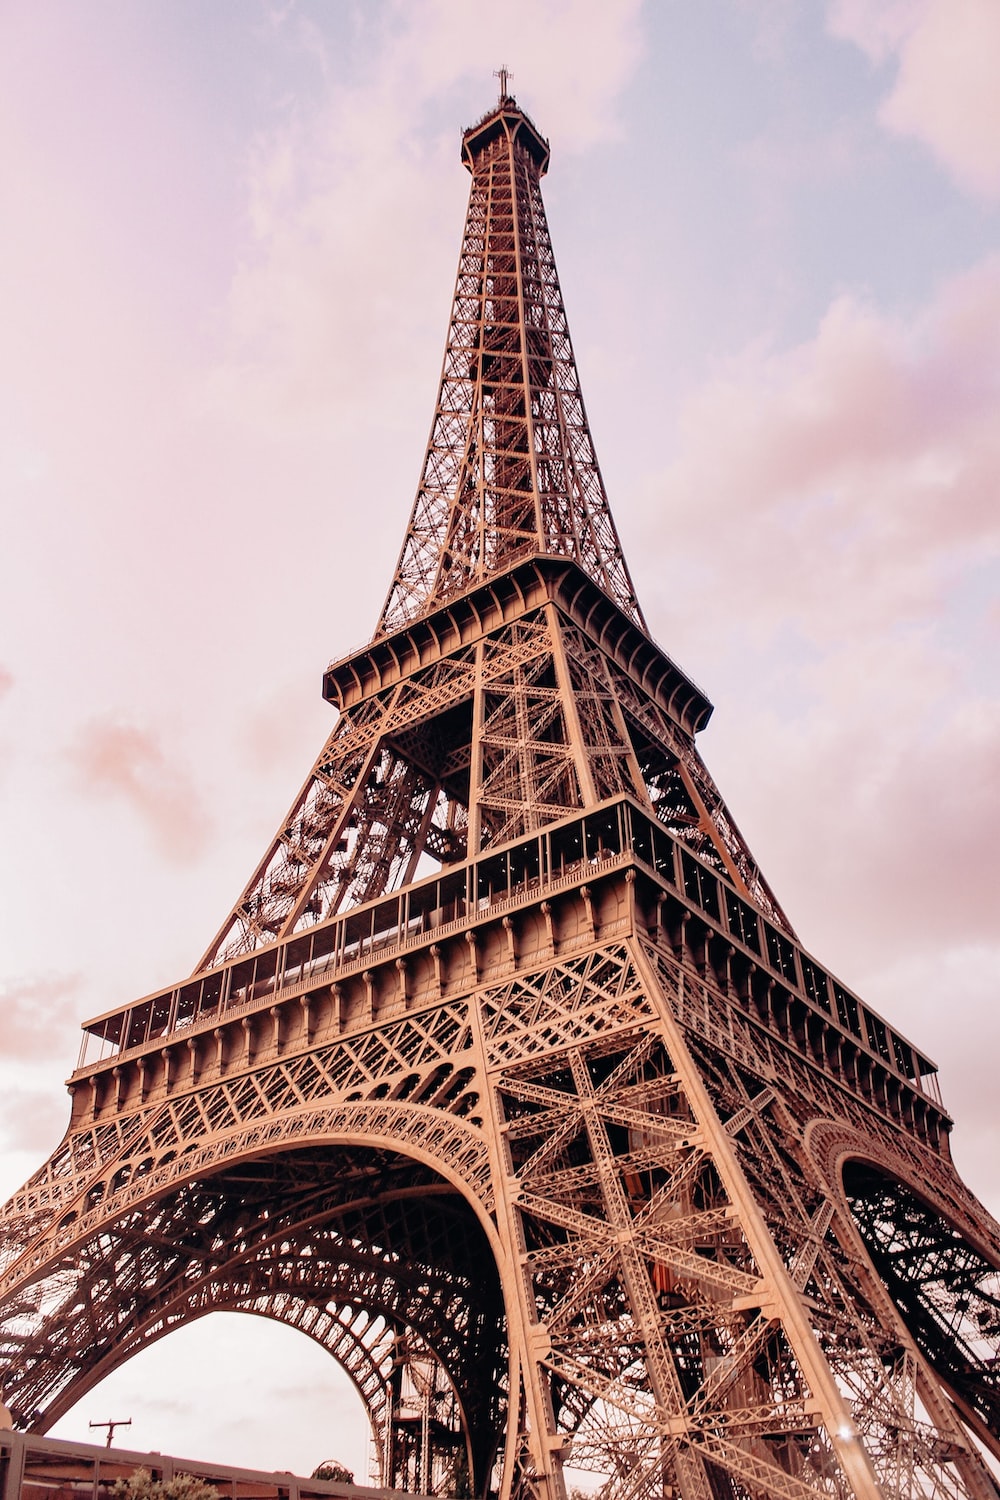 Must-See Attractions in the City of Lights, Paris!